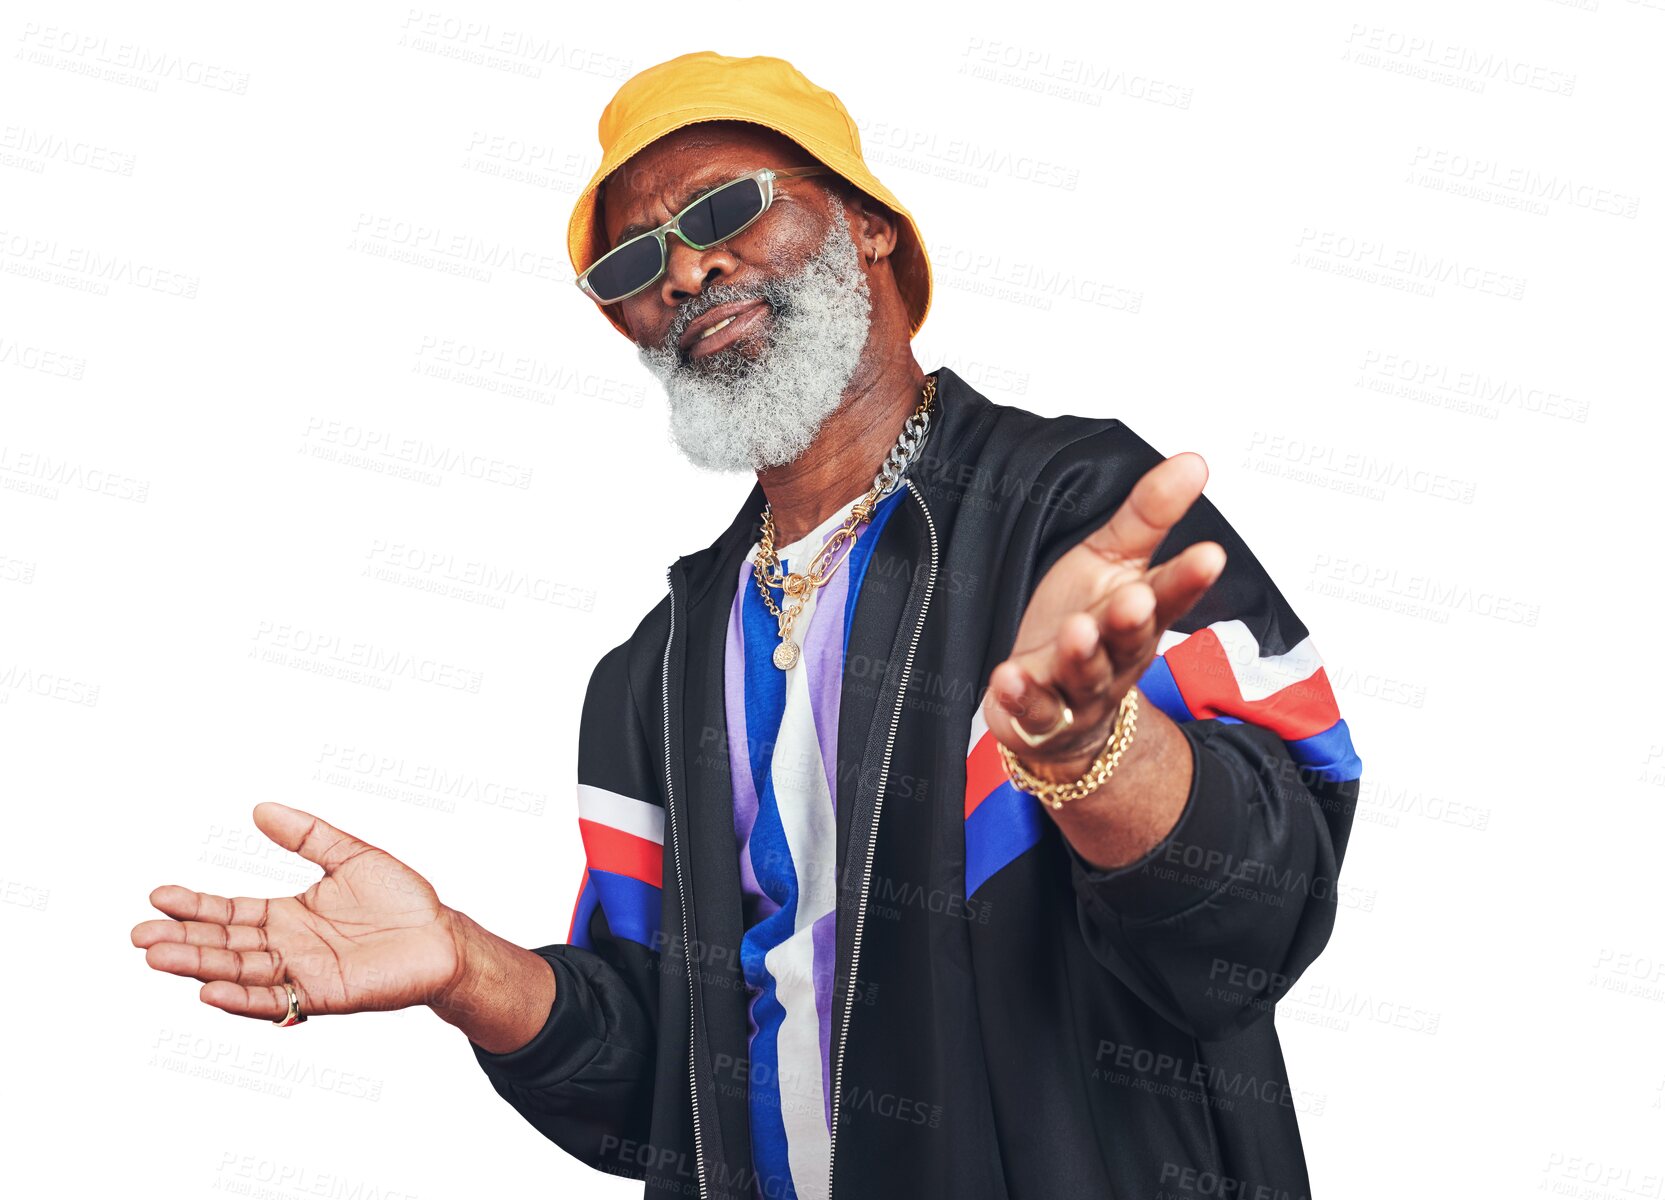 Buy stock photo Portrait, fashion and urban with a senior black man isolated on a transparent background for hip hop style. Retro, sunglasses and attitude with an elderly person on PNG to gesture a question